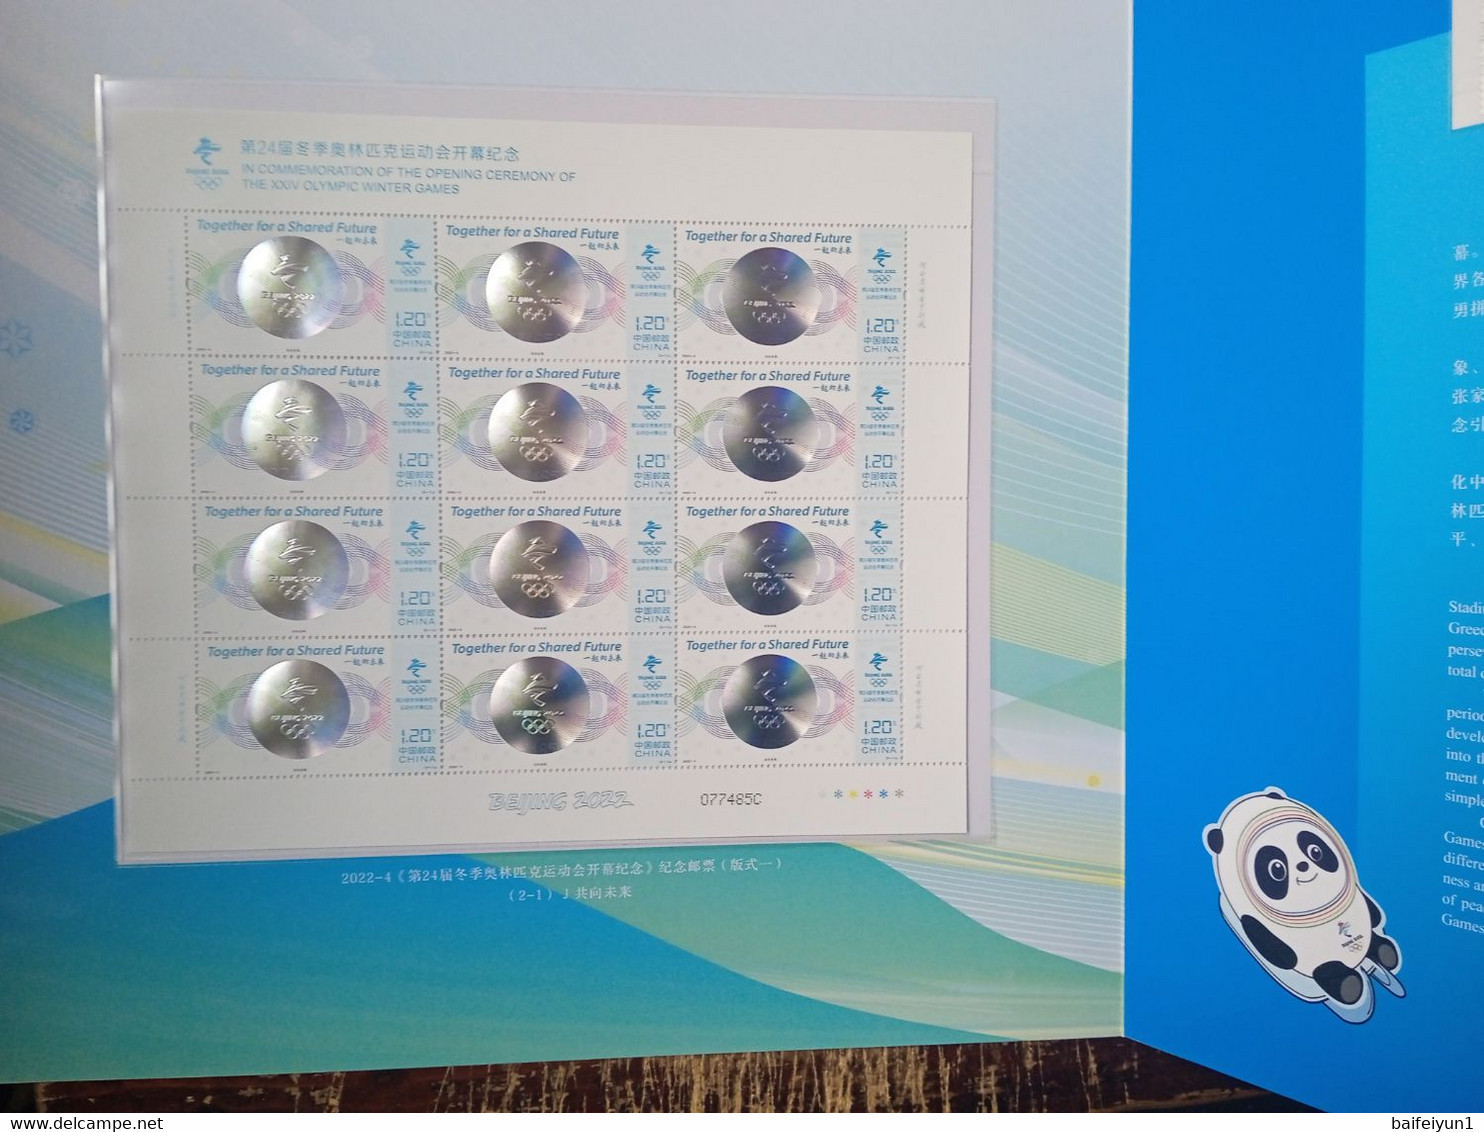 China 2022-4 The Opening Ceremony Of The 2022 Winter Olympics Game Stamps 2v(Hologram) Full Sheet Folder - Winter 2022: Peking